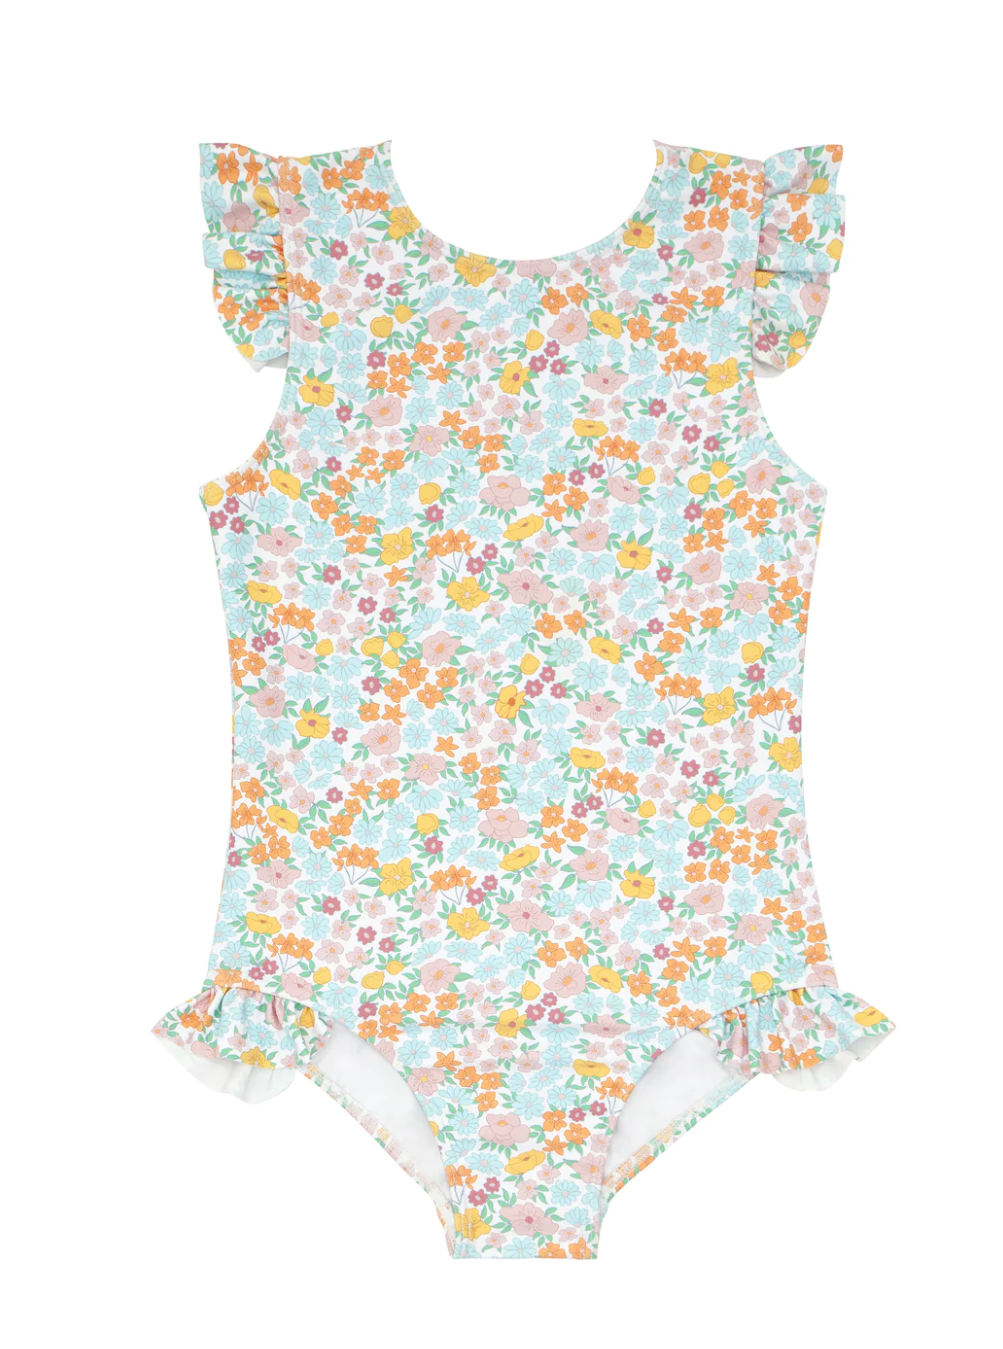 Girls Bright Floral Crossover One Piece